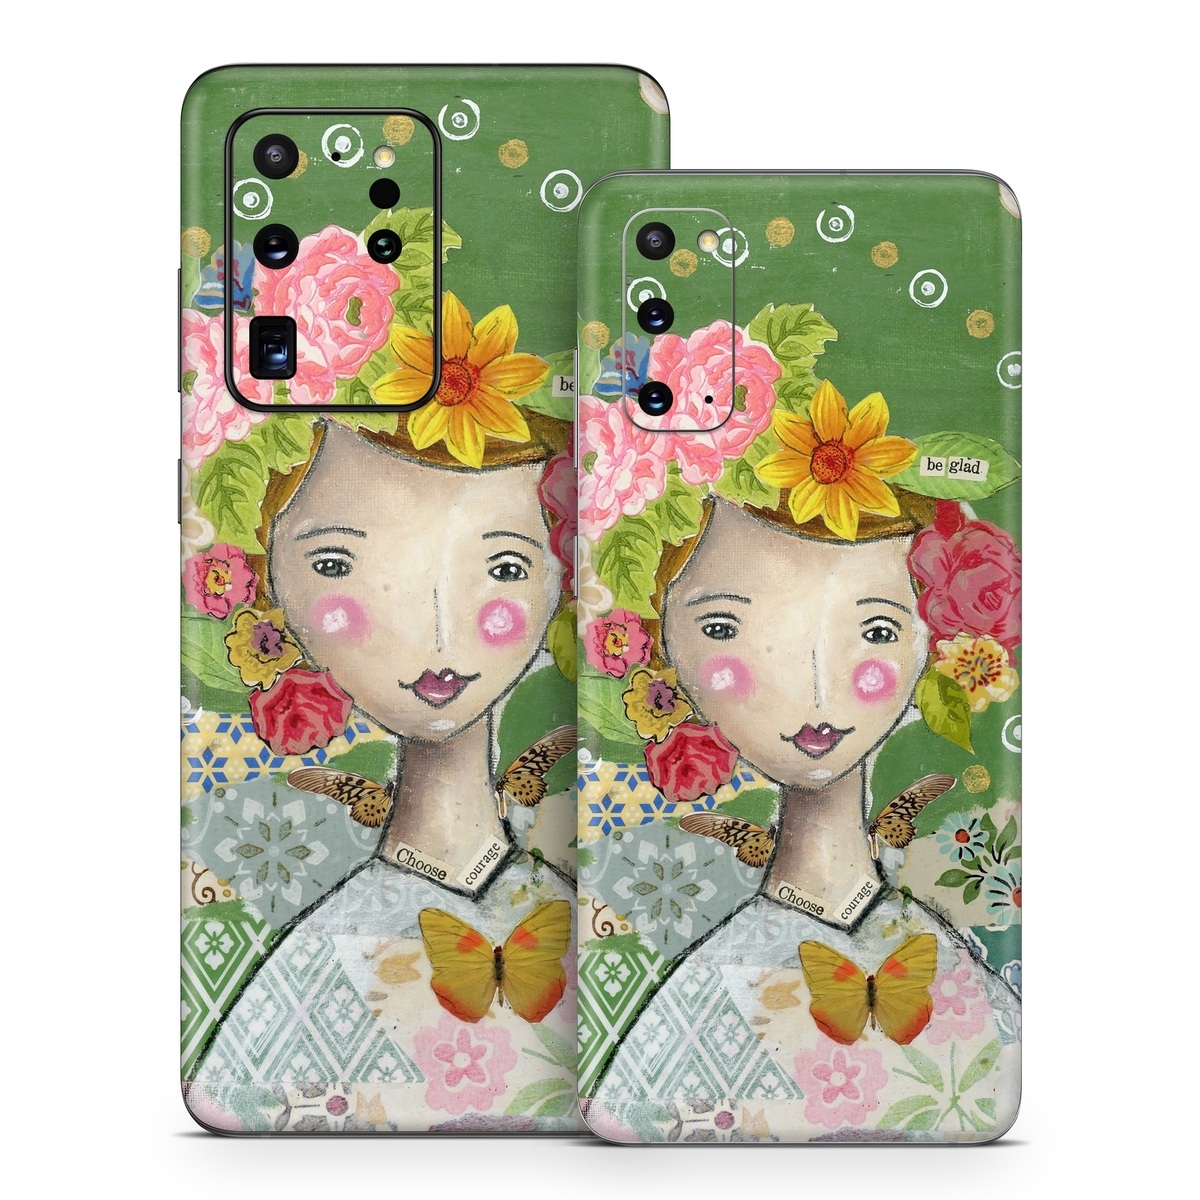 Samsung Galaxy S20 Series Skin design of Watercolor paint, Illustration, Art, Painting, Plant, Flower, Visual arts, Paint, Child art, Acrylic paint, with green, pink, red, orange, white, blue, brown colors